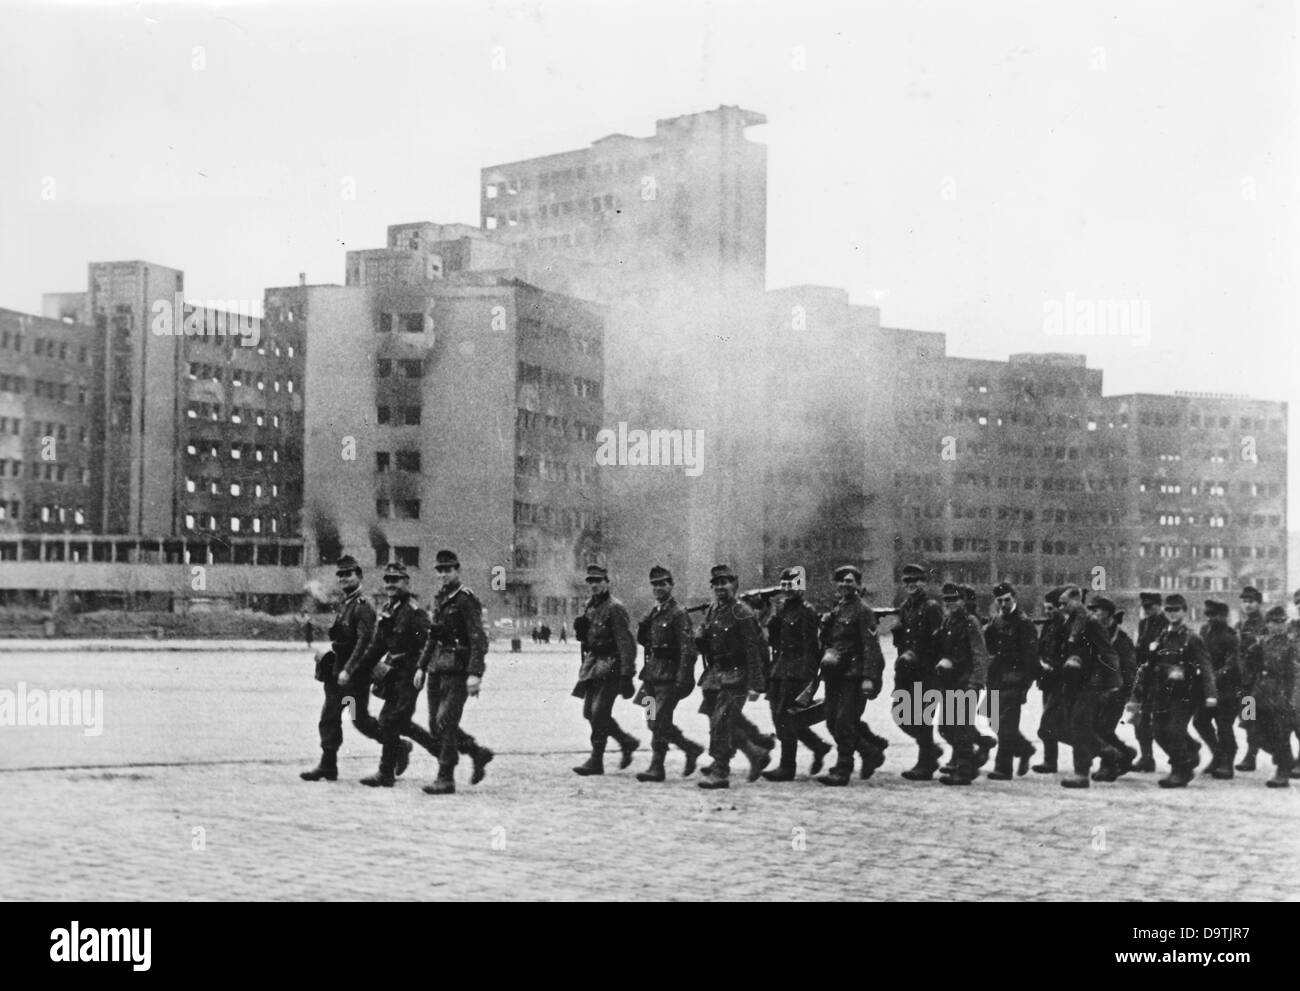 The Nazi Propaganda! on the back of the image reads: "Soldiers of the German Mountain Infantry march across the Dzerzhinsky Square in Kharkiv." Image from the Eastern Front/Ukraine, 6 November 1941. The attack on the Soviet Union by the German Reich was agreed on in July 1940 and prepared as the "Operation Barbarossa" since December 1940. On 22 June 1941, the invasion by the German Wehrmacht started. Fotoarchiv für Zeitgeschichte Stock Photo